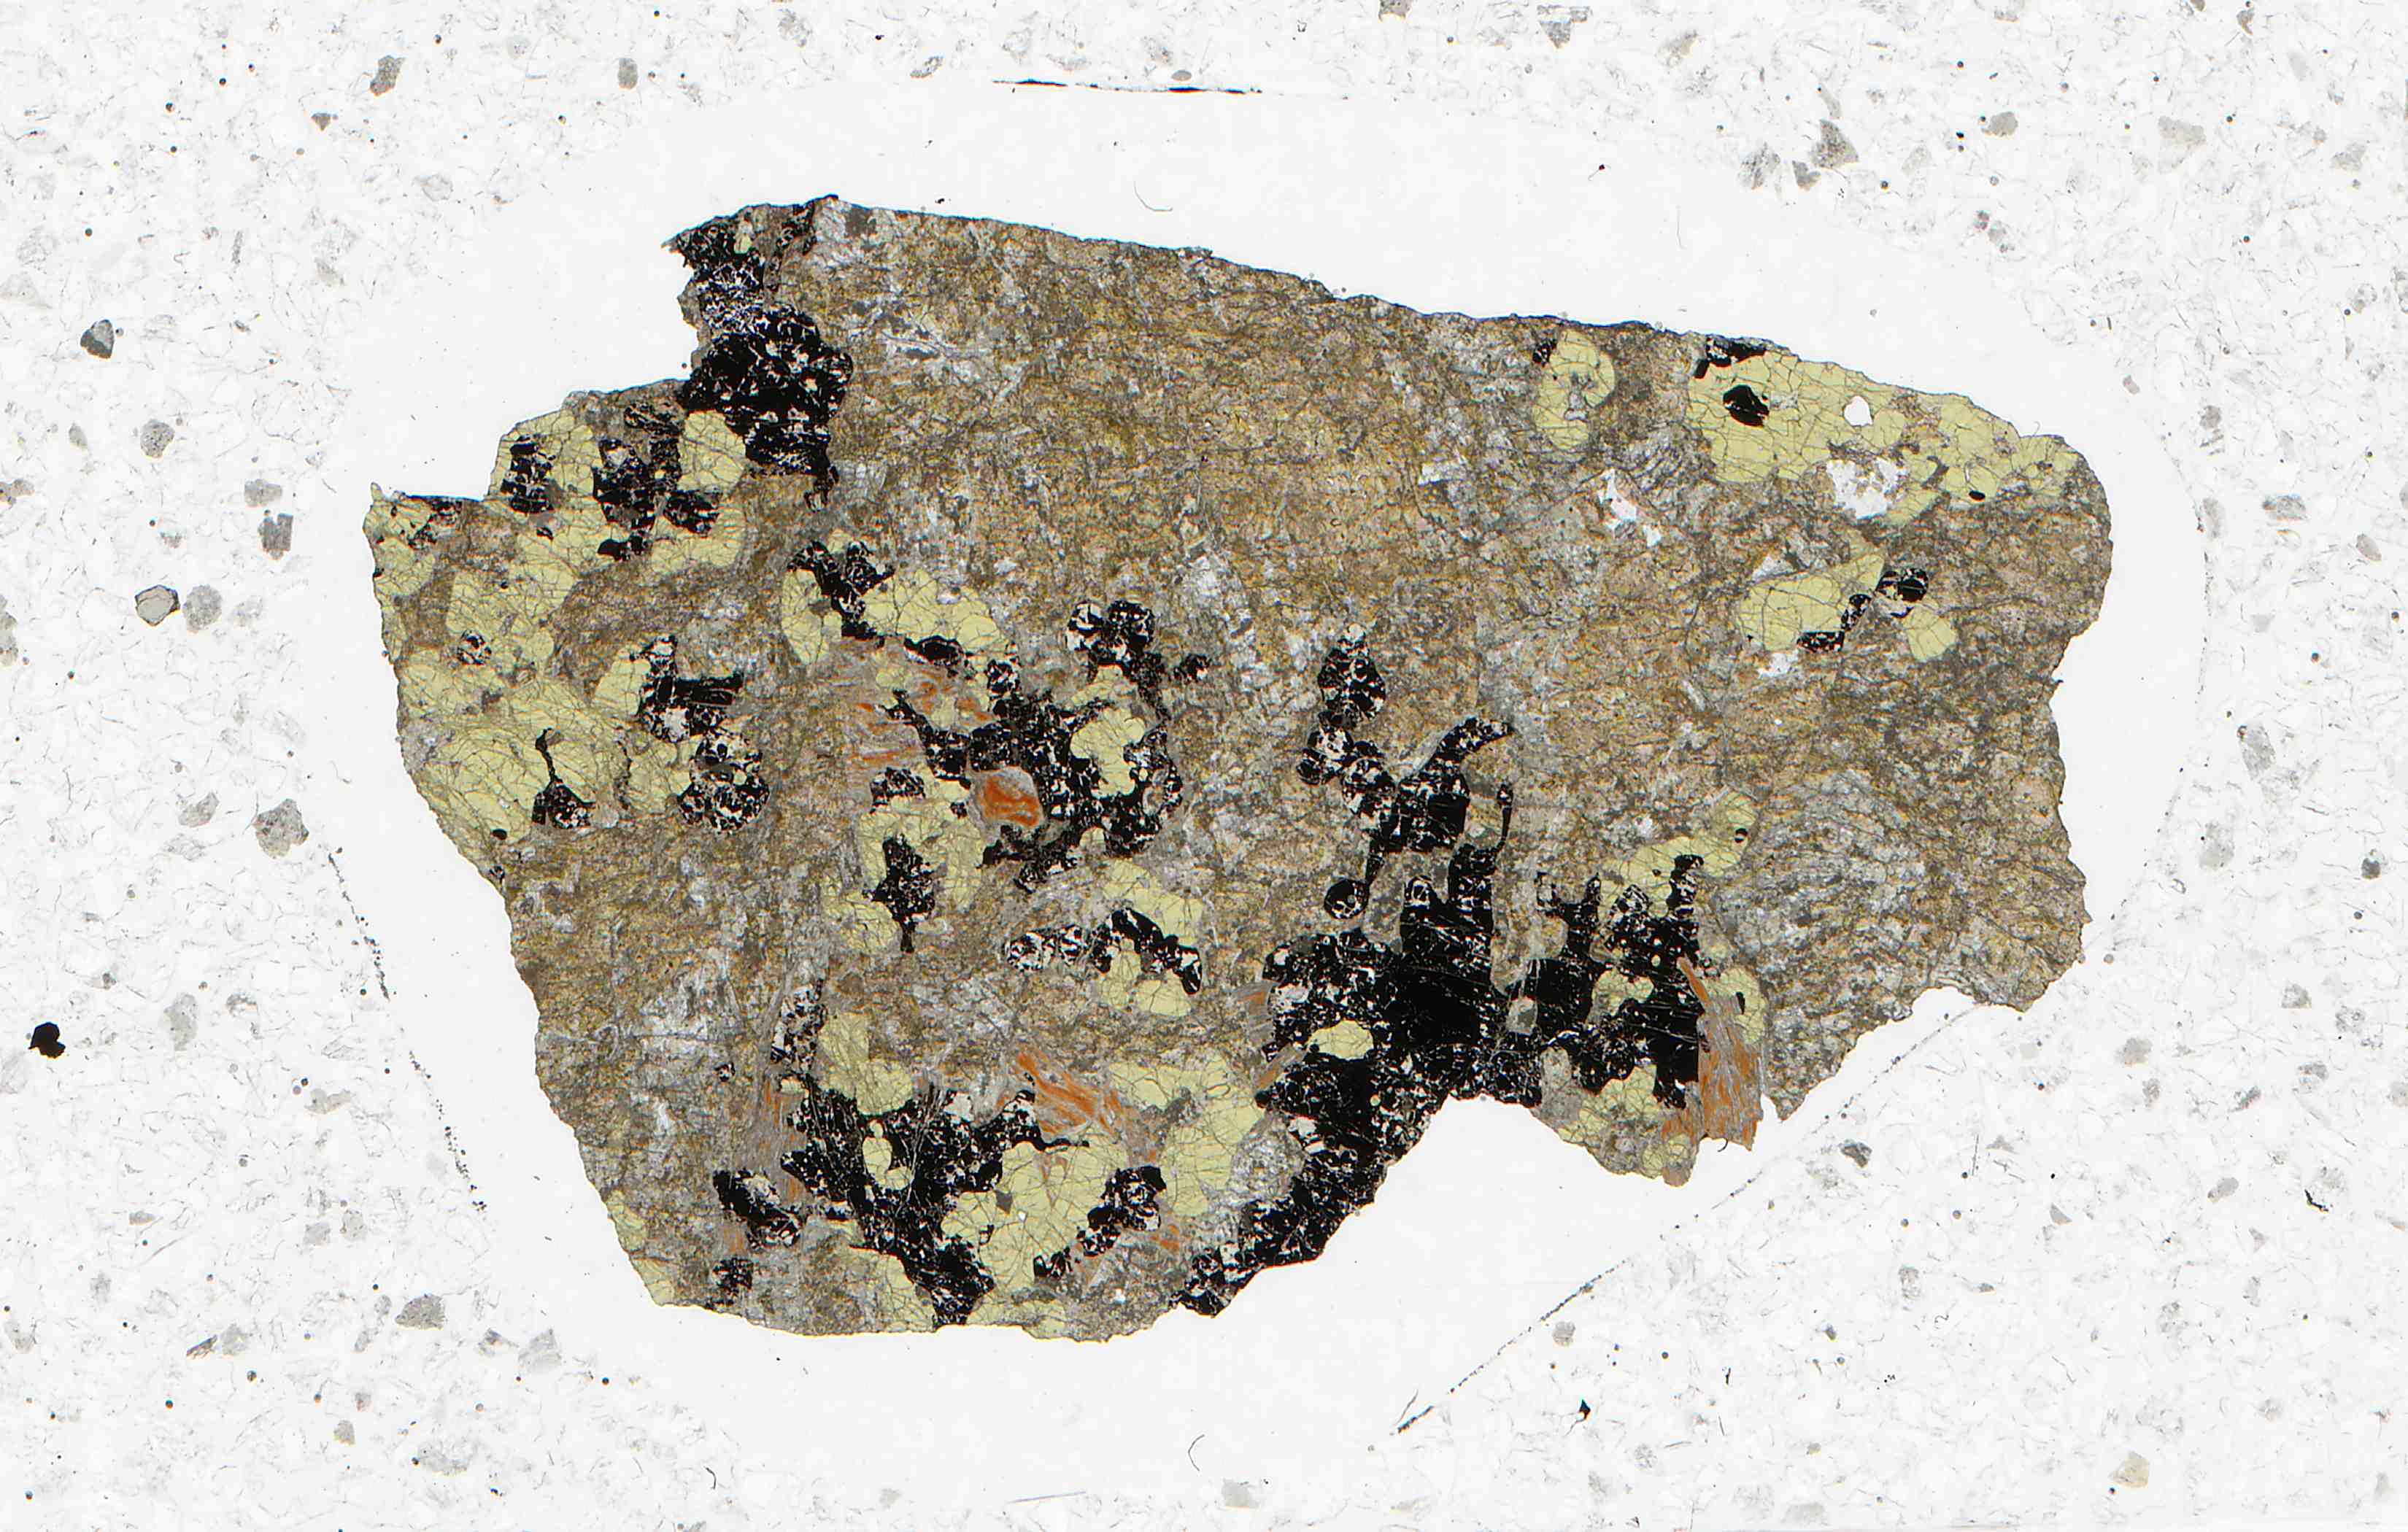 Franklin New Jersey hancockite in thin section